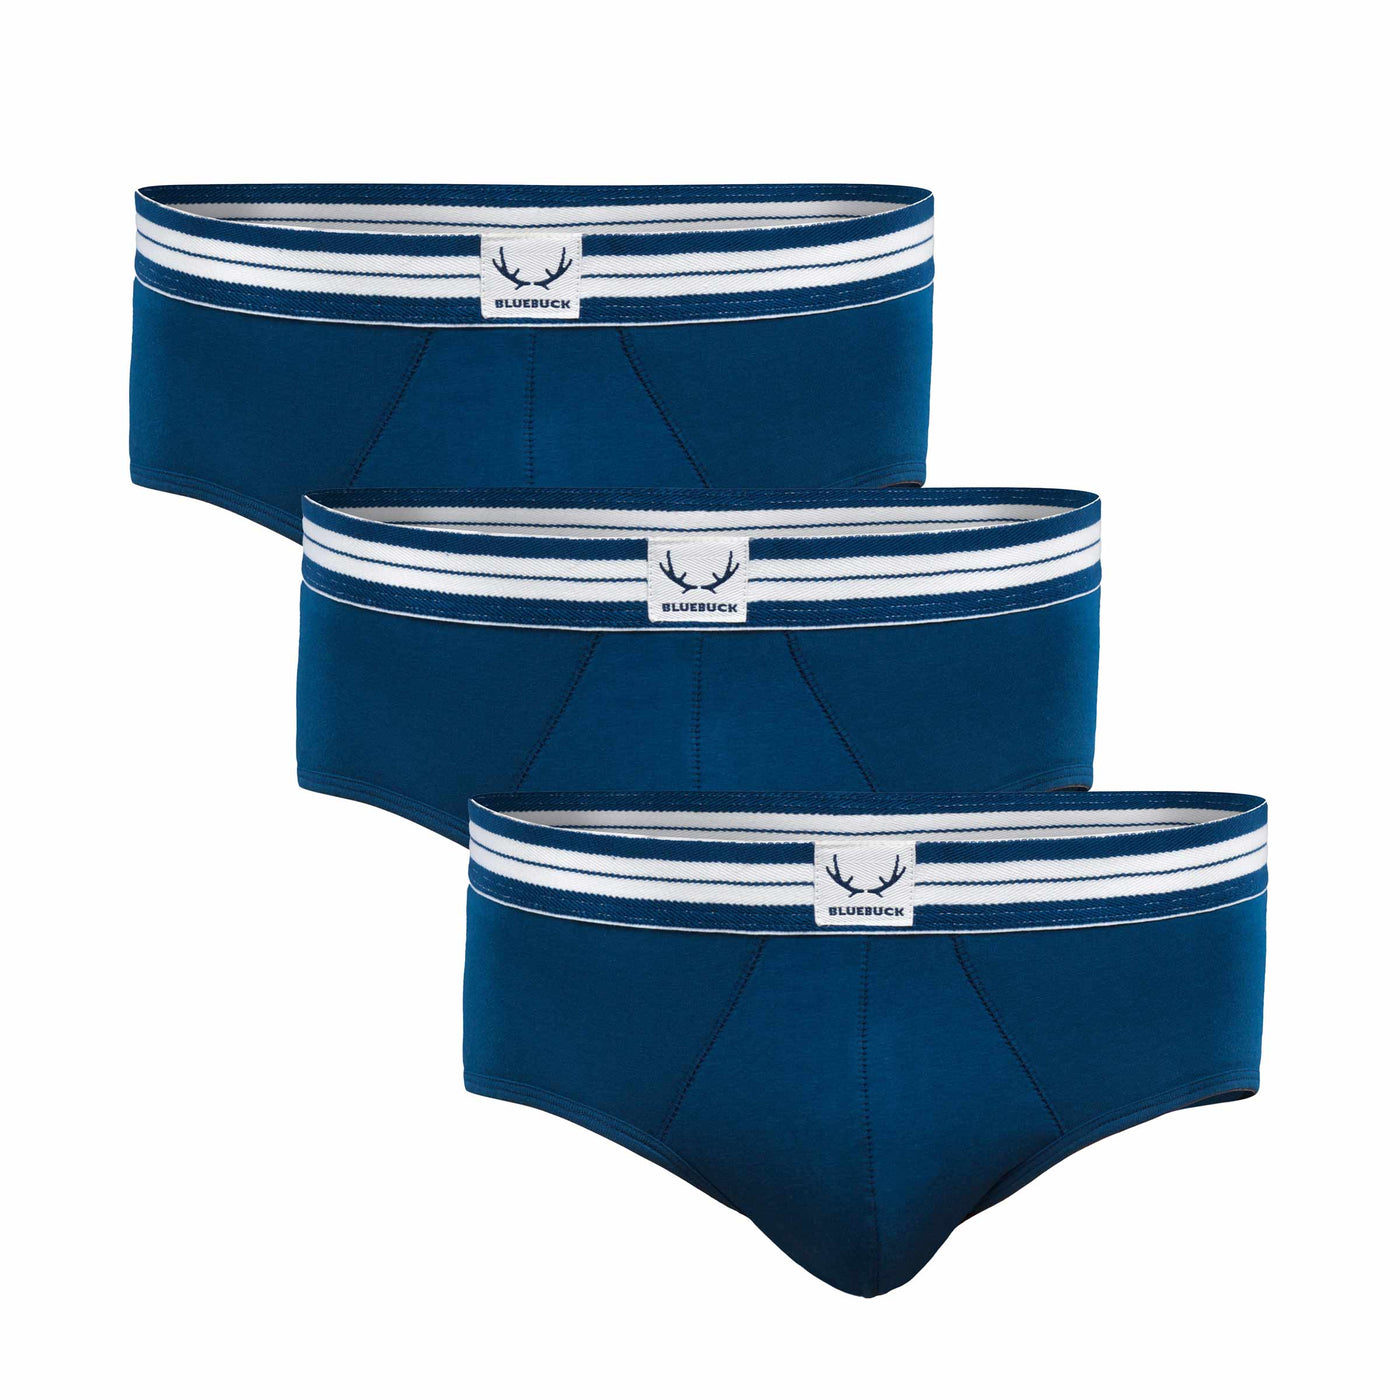 3 classic briefs in navy blue organic cotton for men